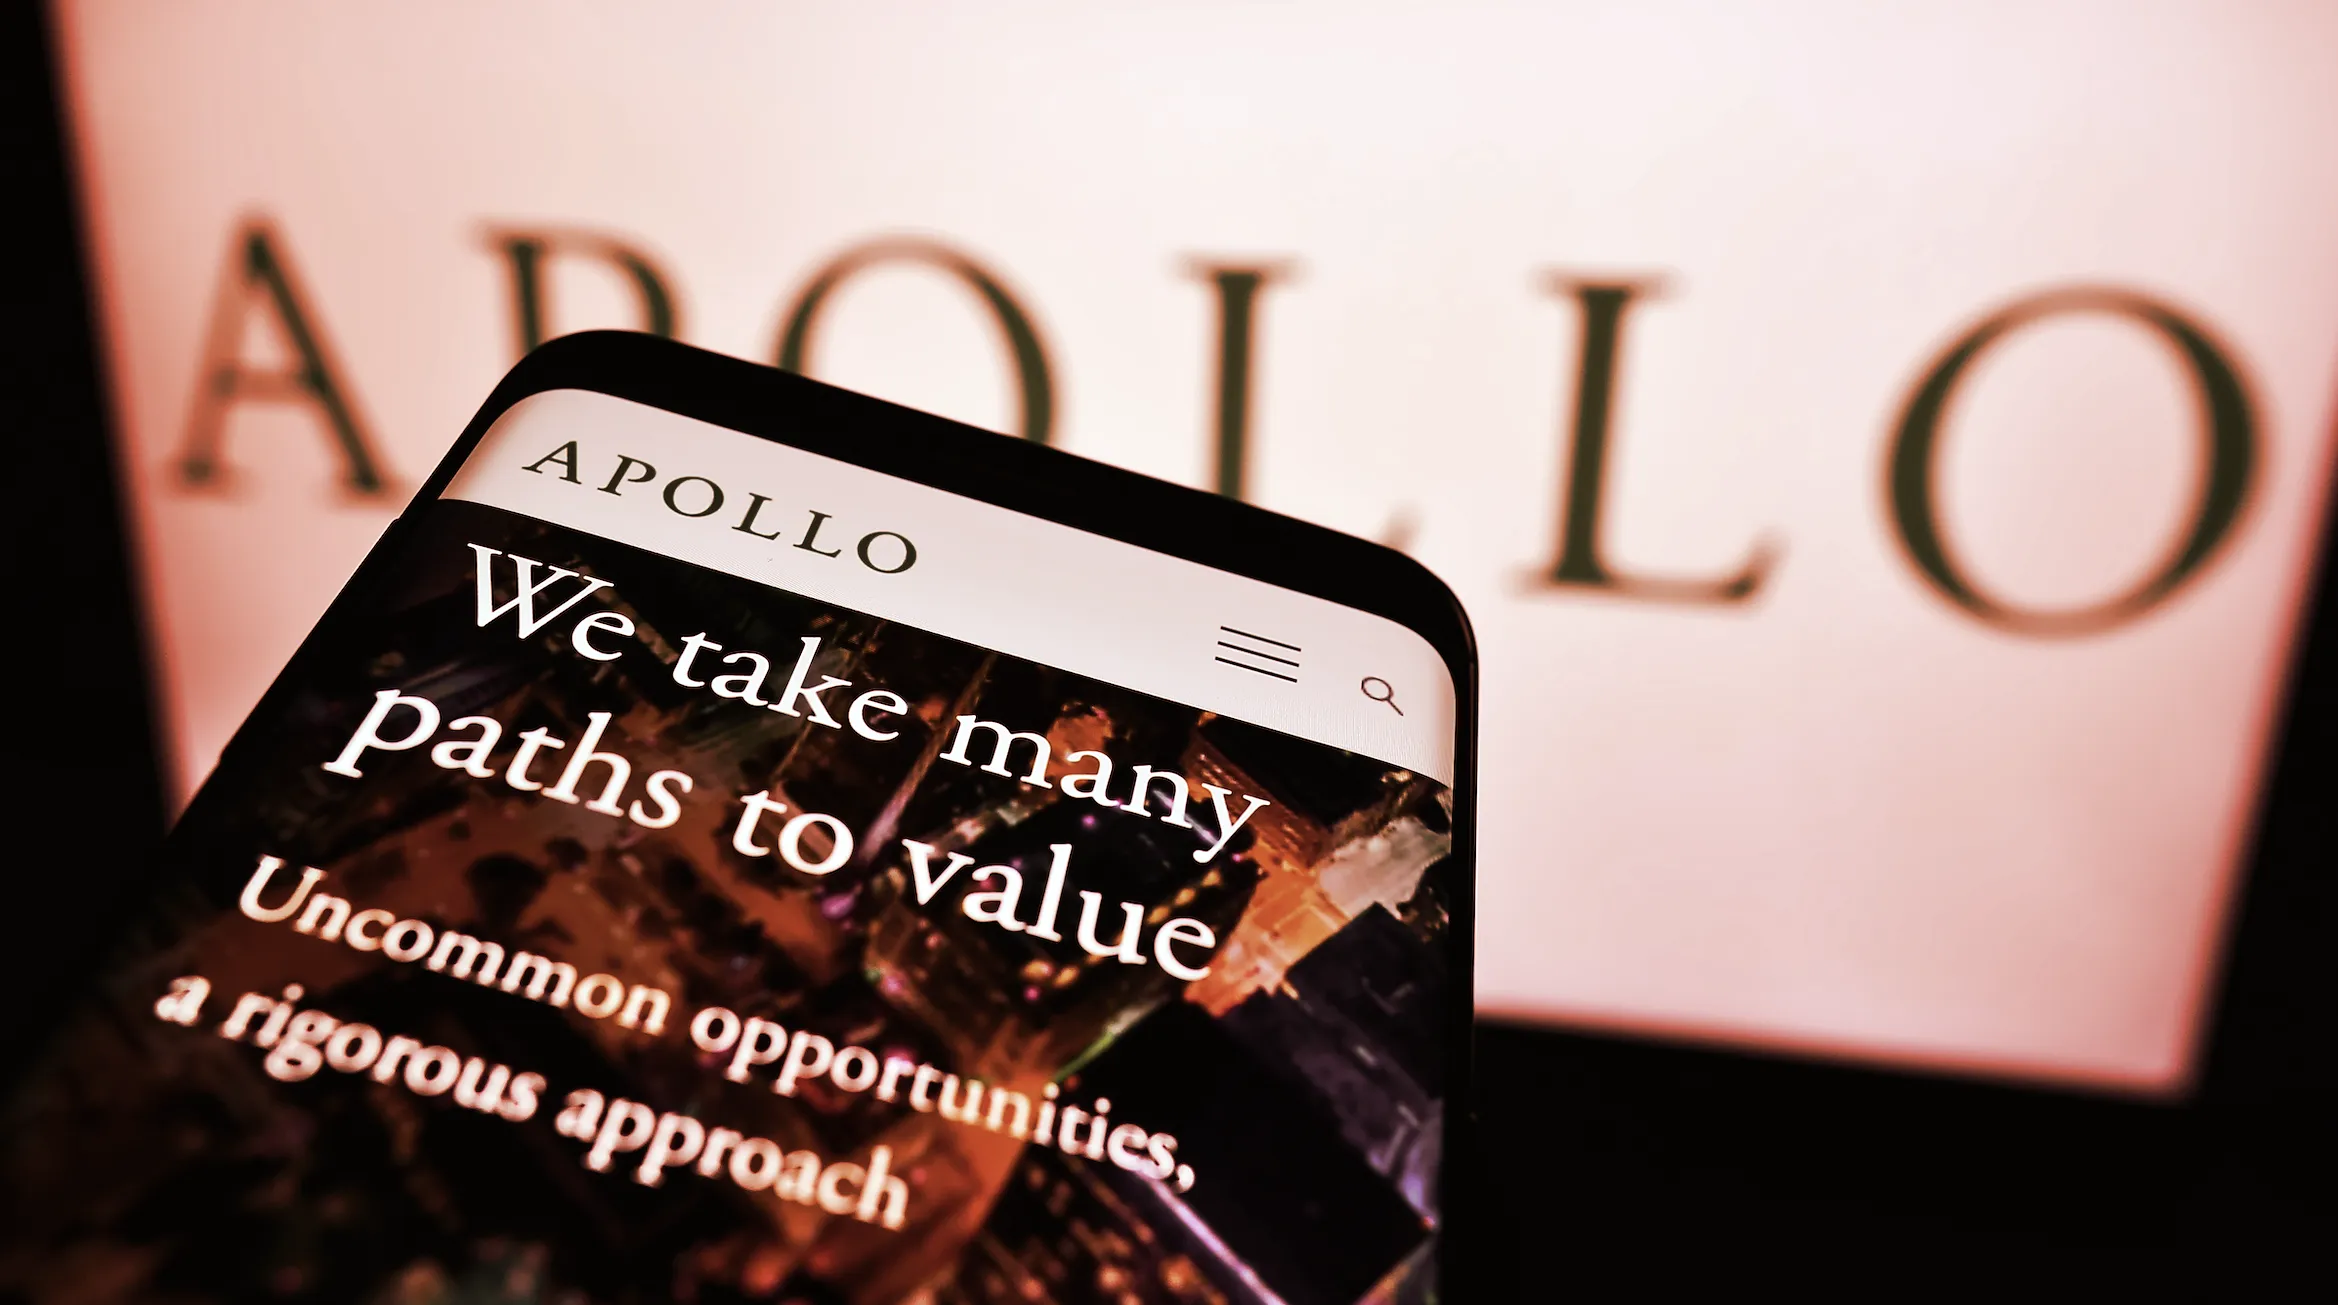 Mobile phone with website of US investment company Apollo Global Management Inc. on screen in front of logo. (Shutterstock)